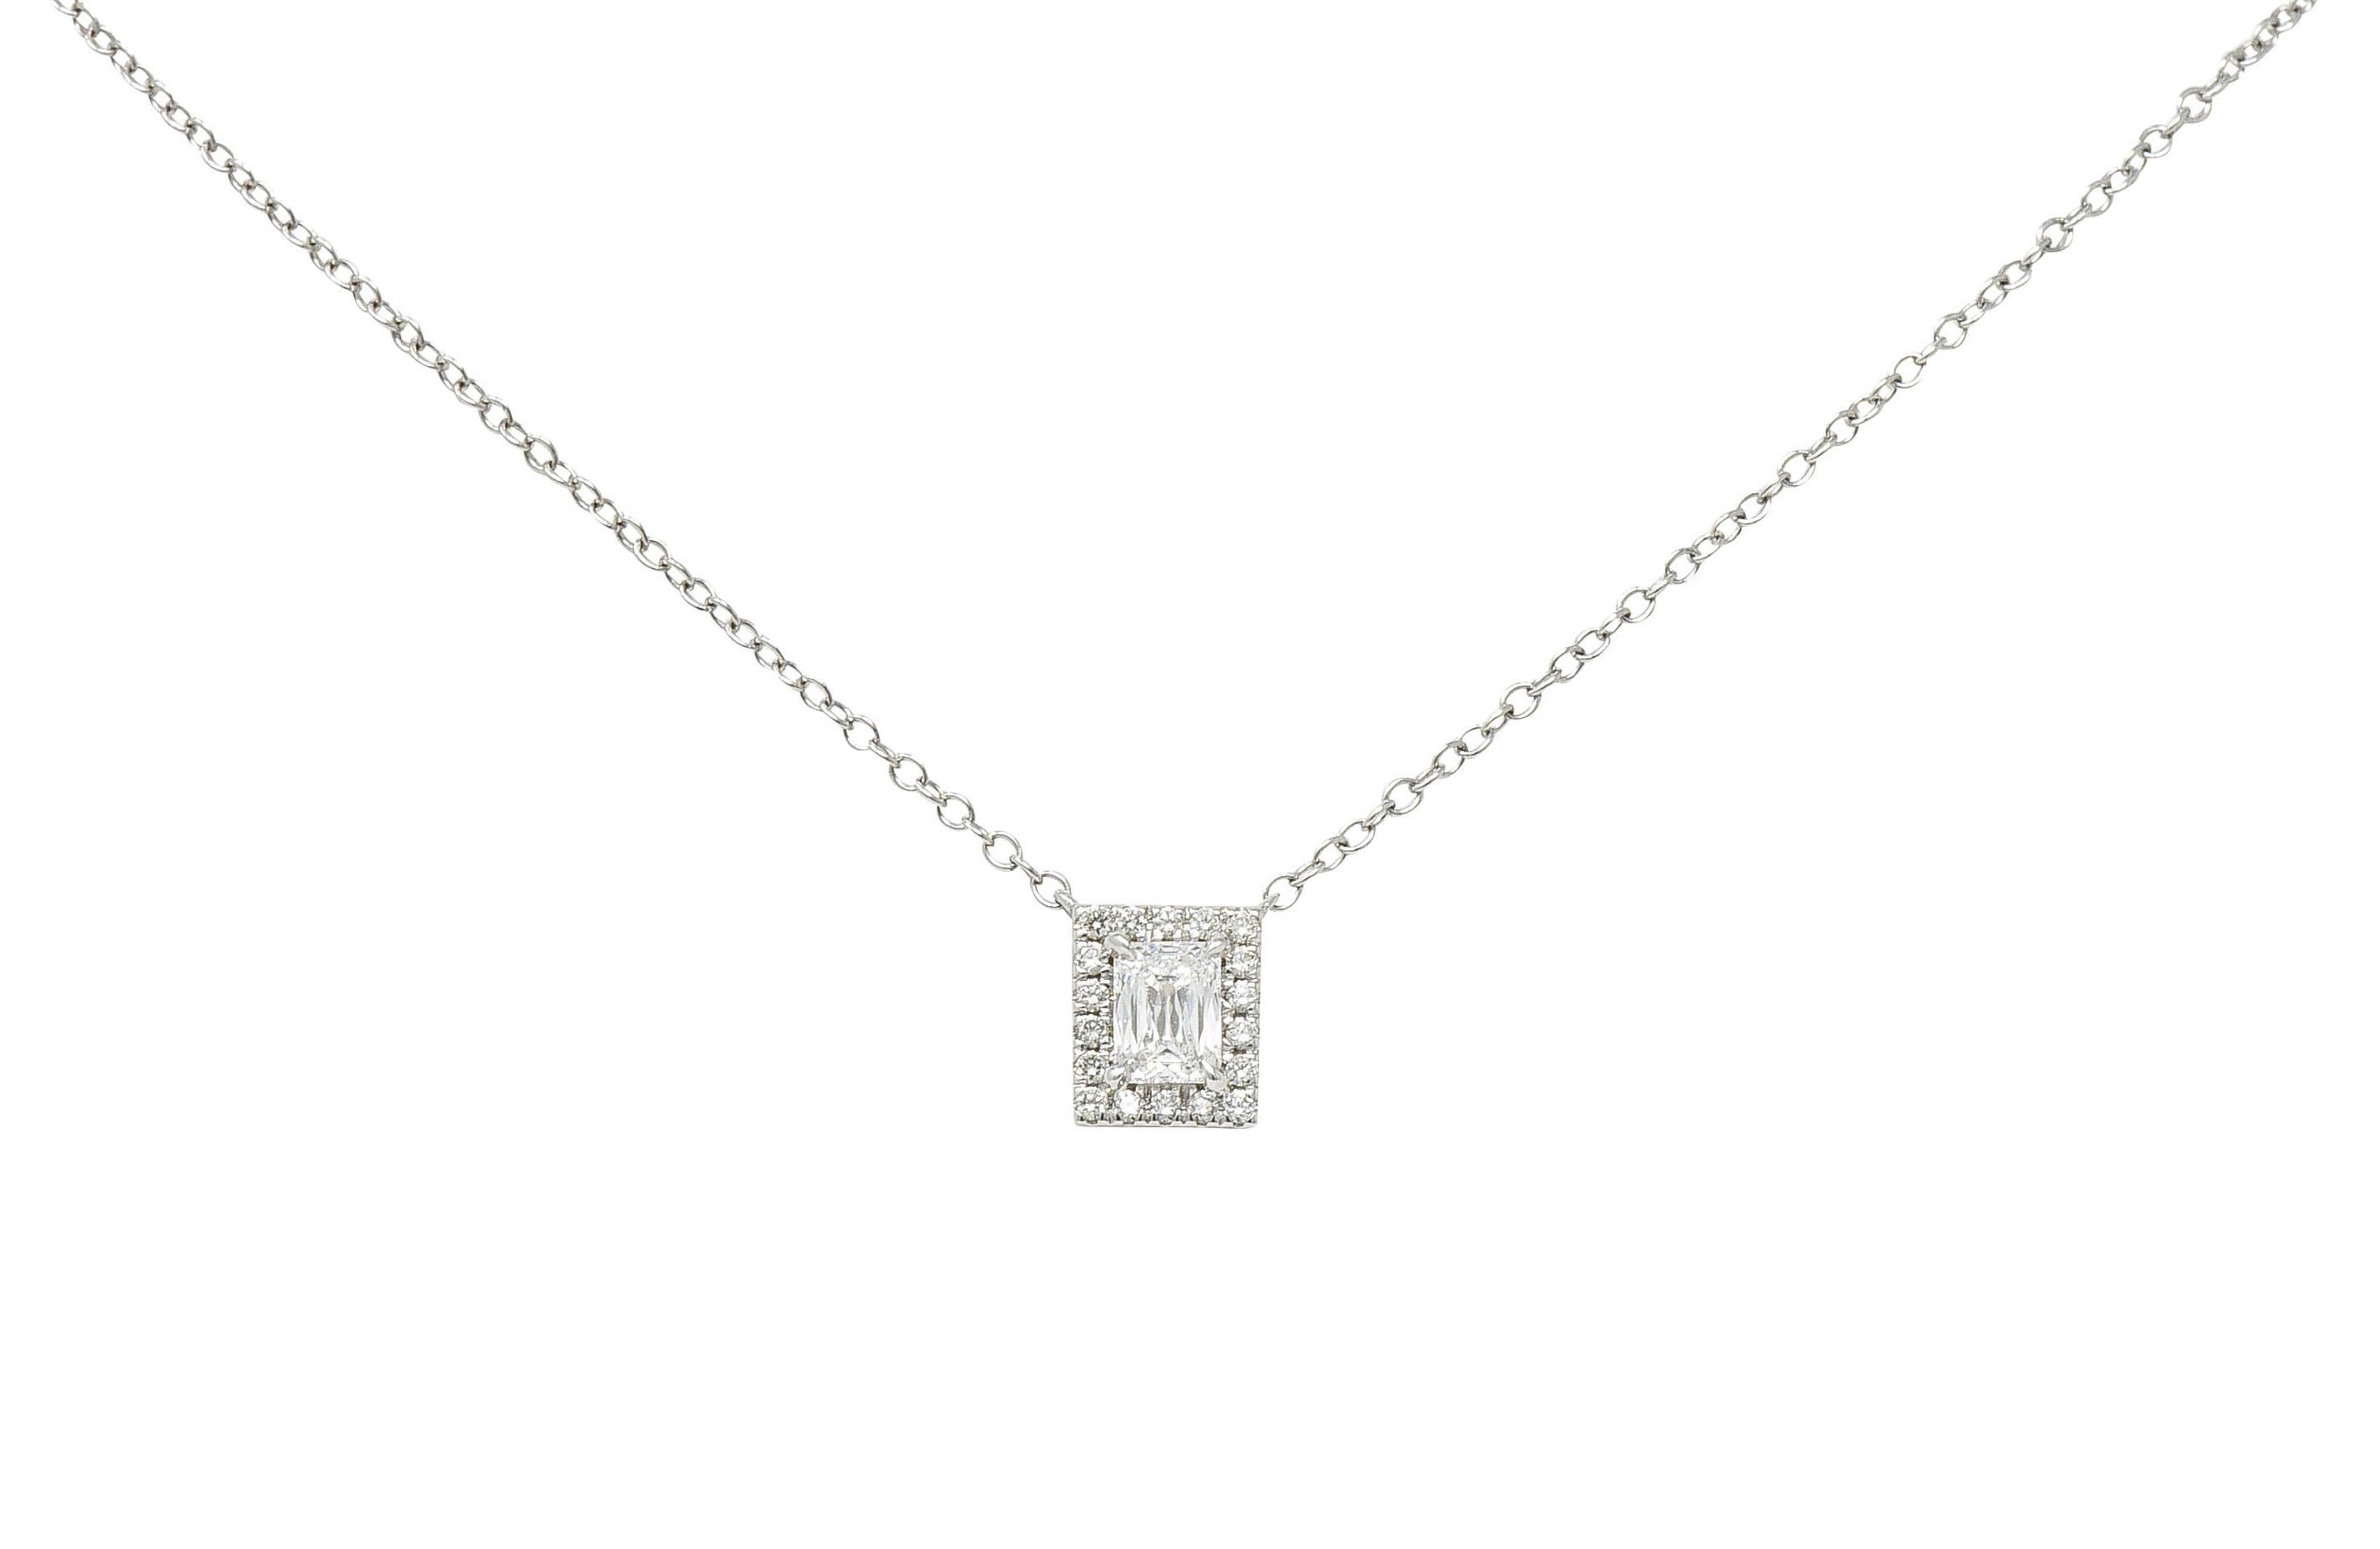 Classic cable chain necklace centers a rectangular diamond station - fixed in place

Featuring a crisscut diamond weighing approximately 0.50 carat - E color with VS clarity

With a round brilliant diamond halo weighing in total approximately 0.20